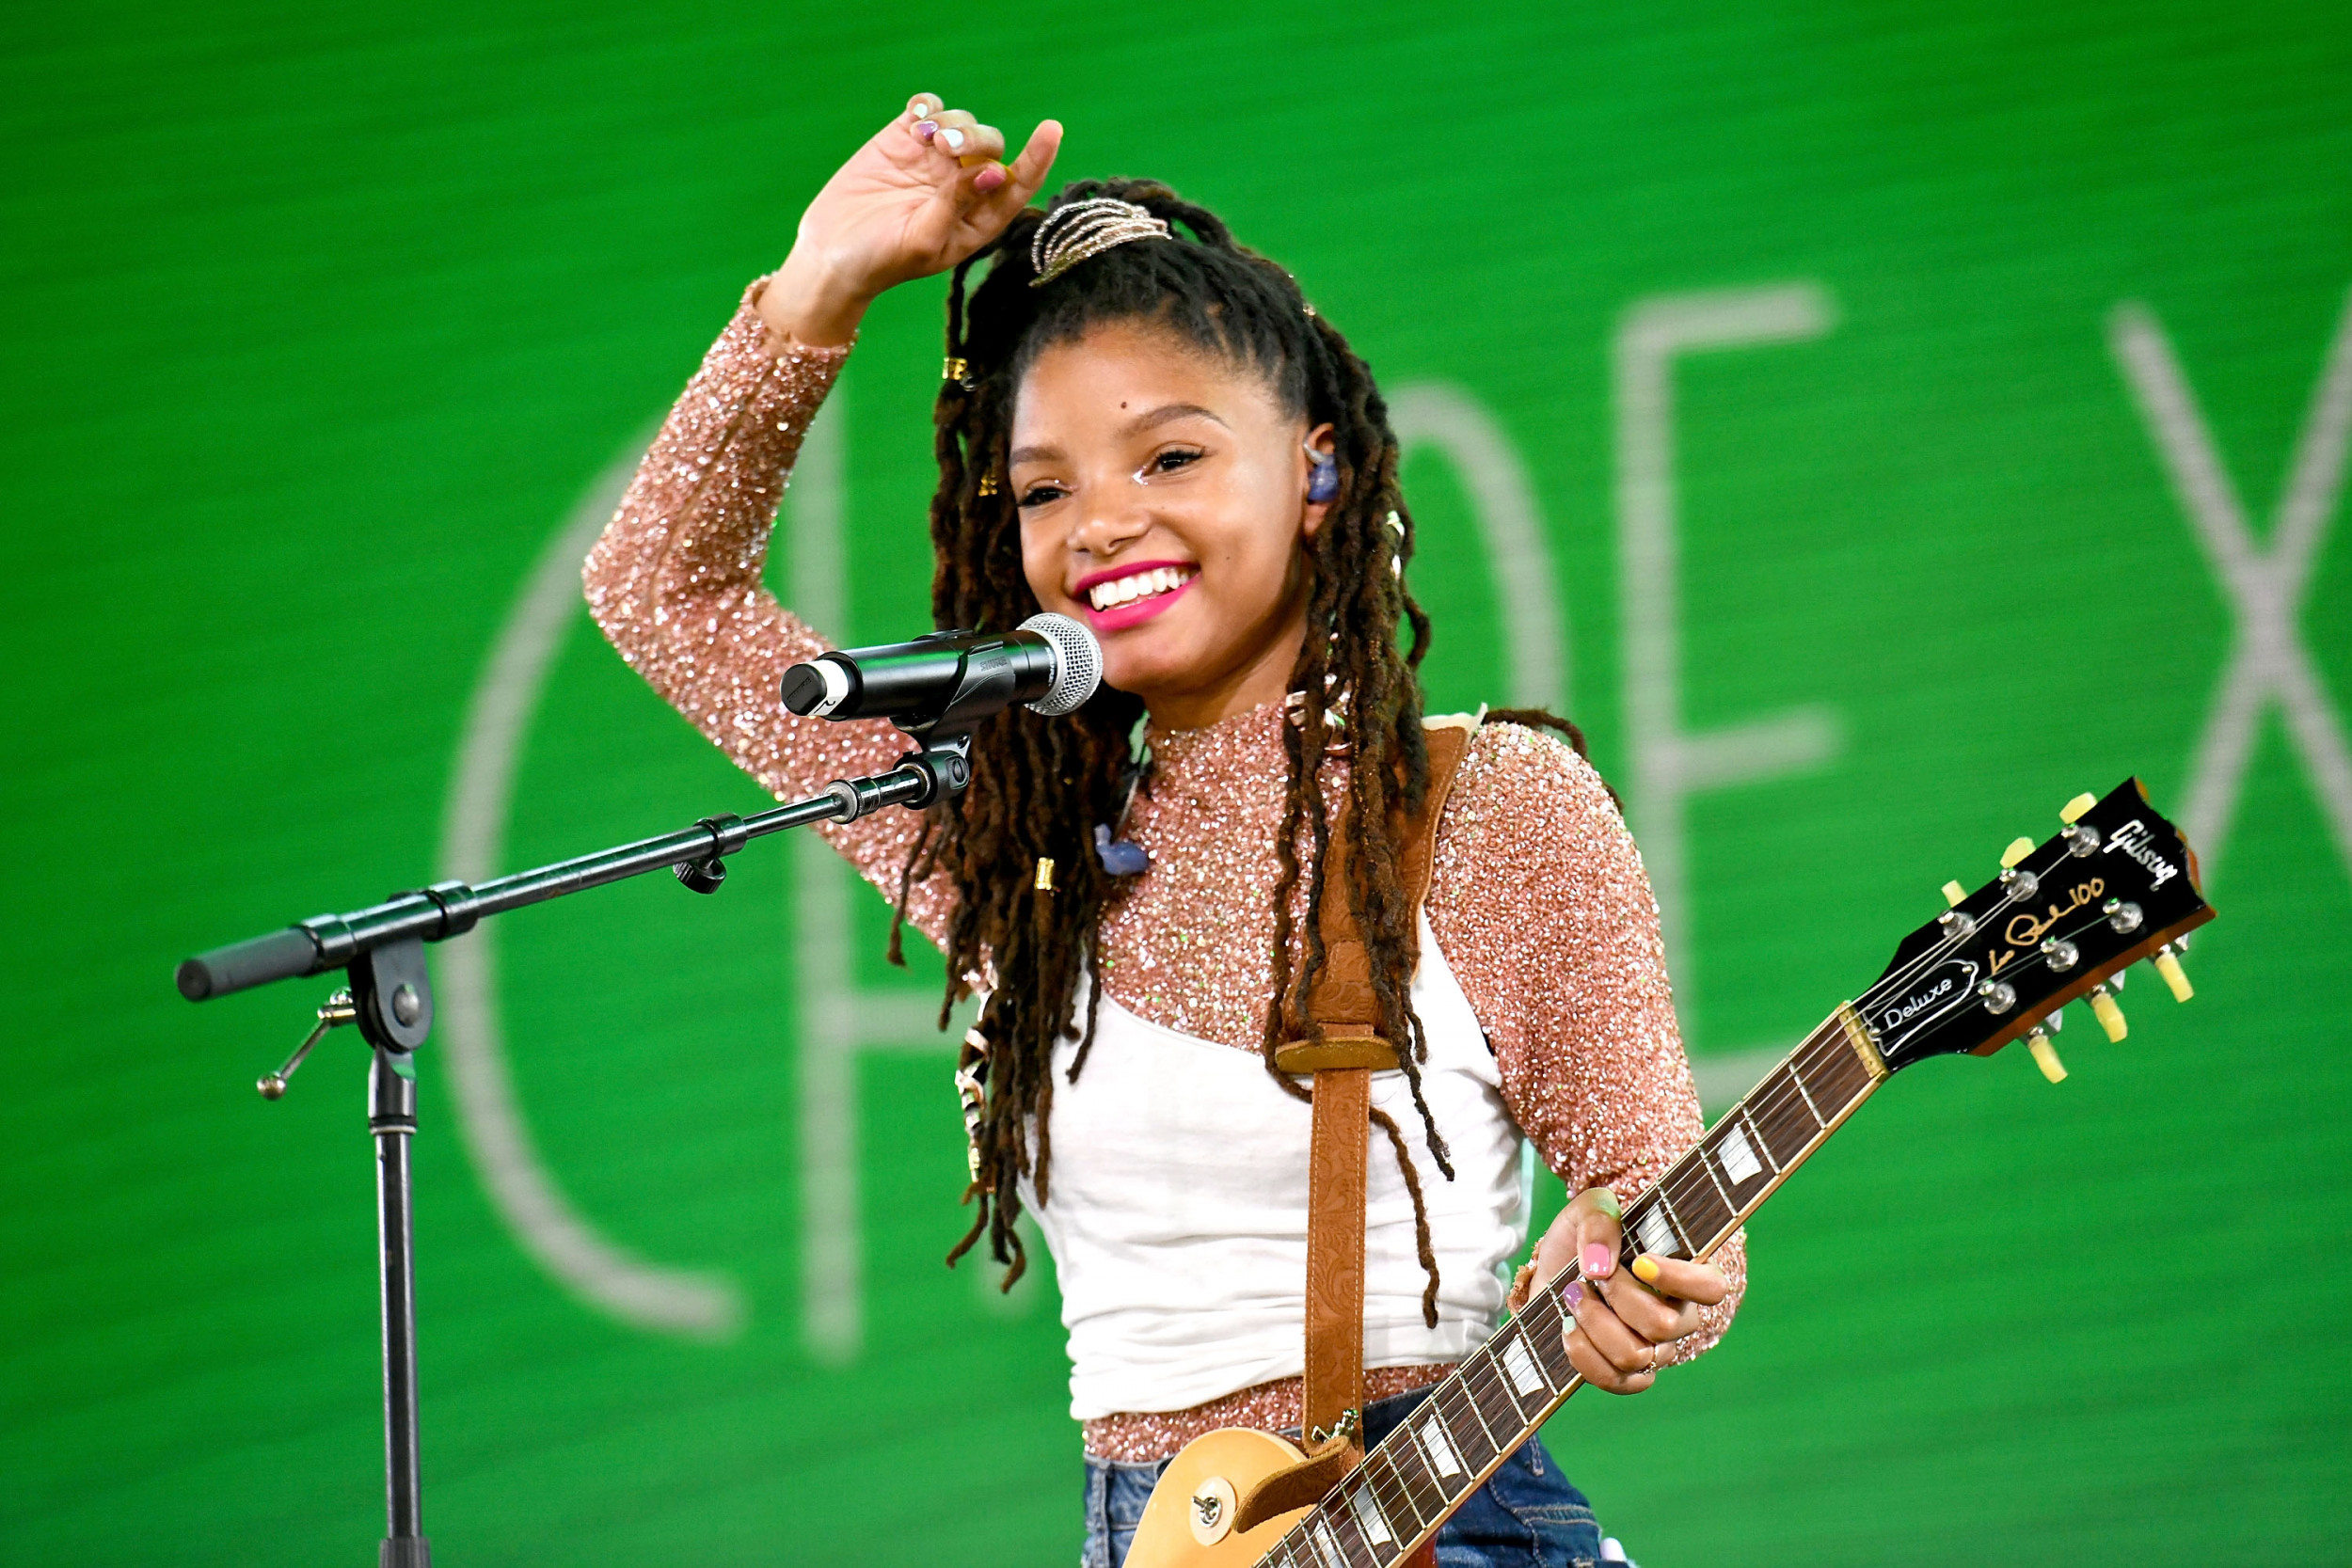 Disney Casts Halle Bailey As Ariel In Live Action Remake Of The Little